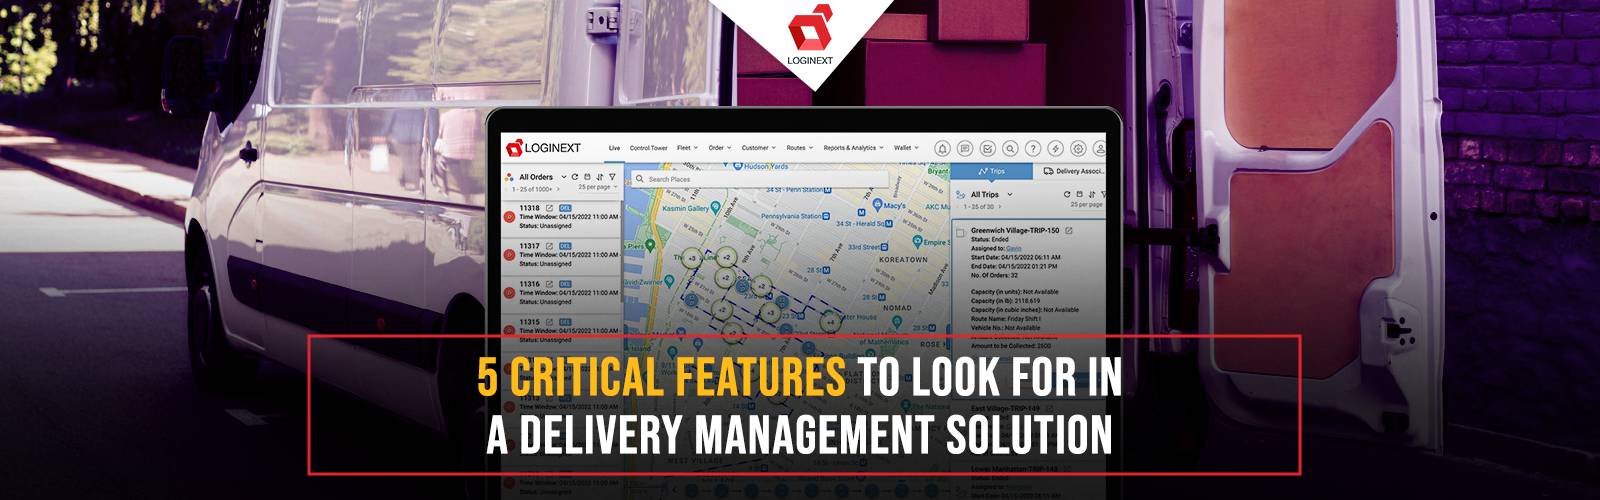 5 critical features in a delivery management solution